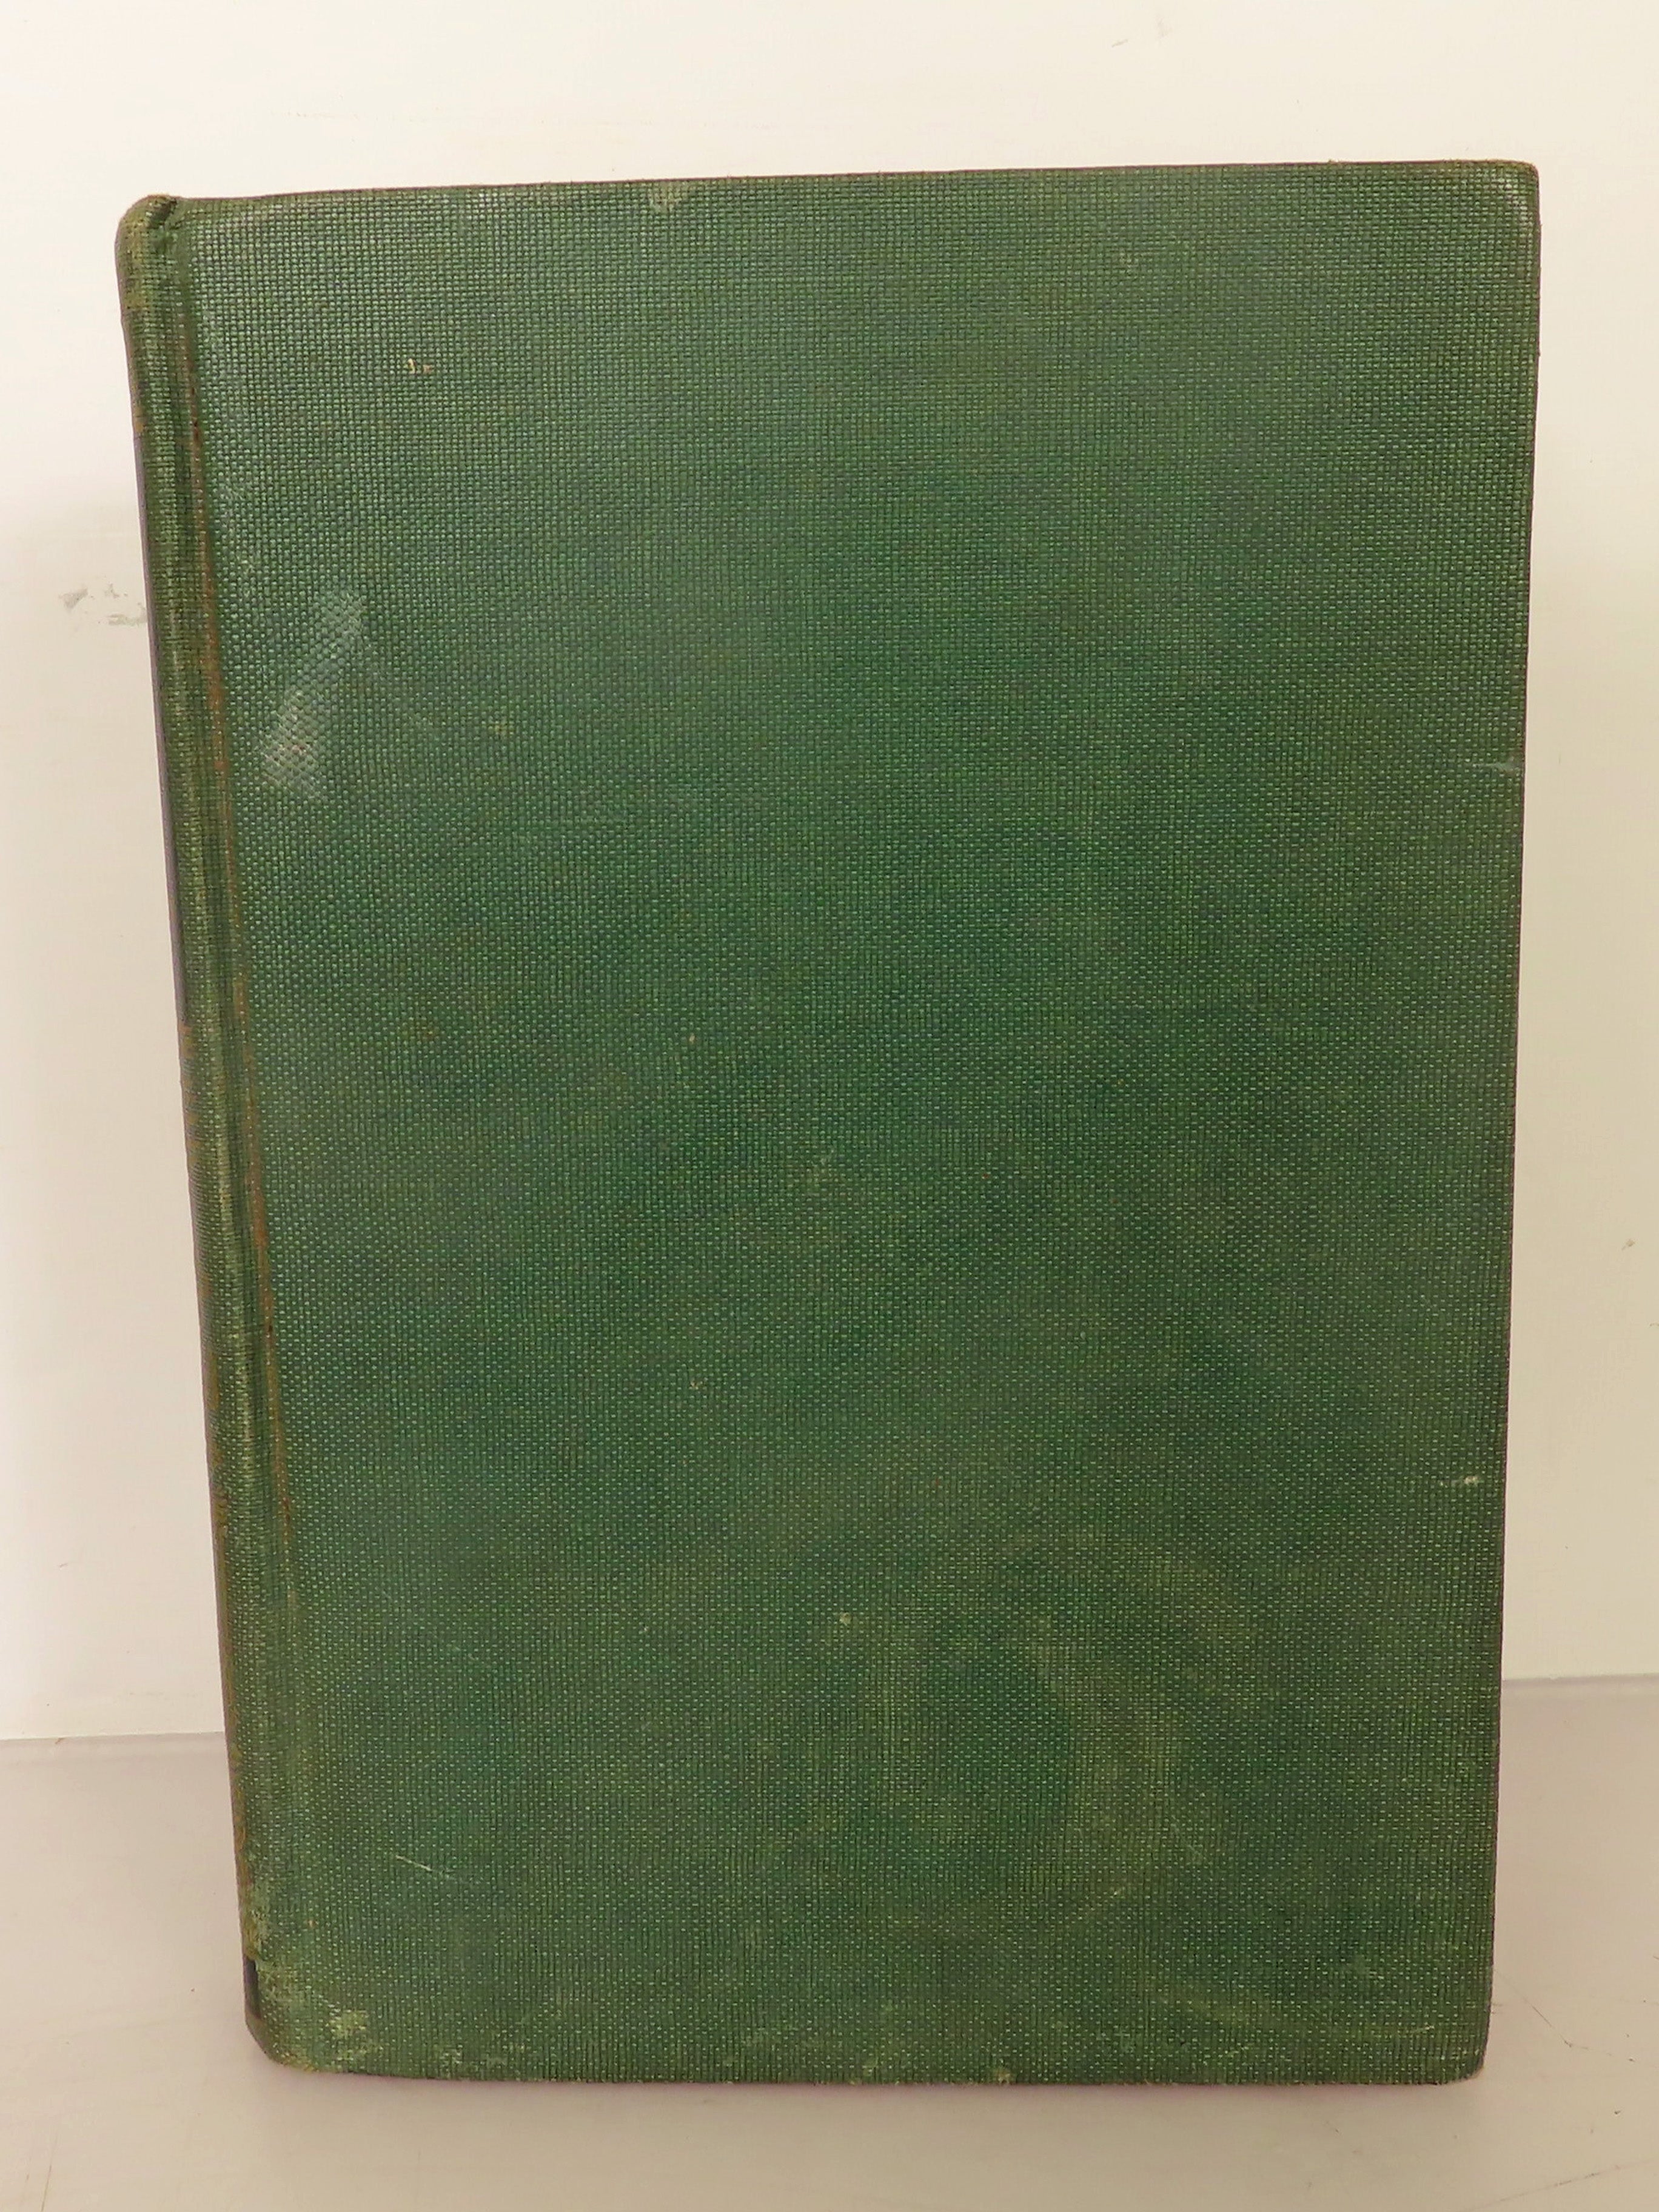 The Garden Month by Month by Mabel Sedgwick 1907